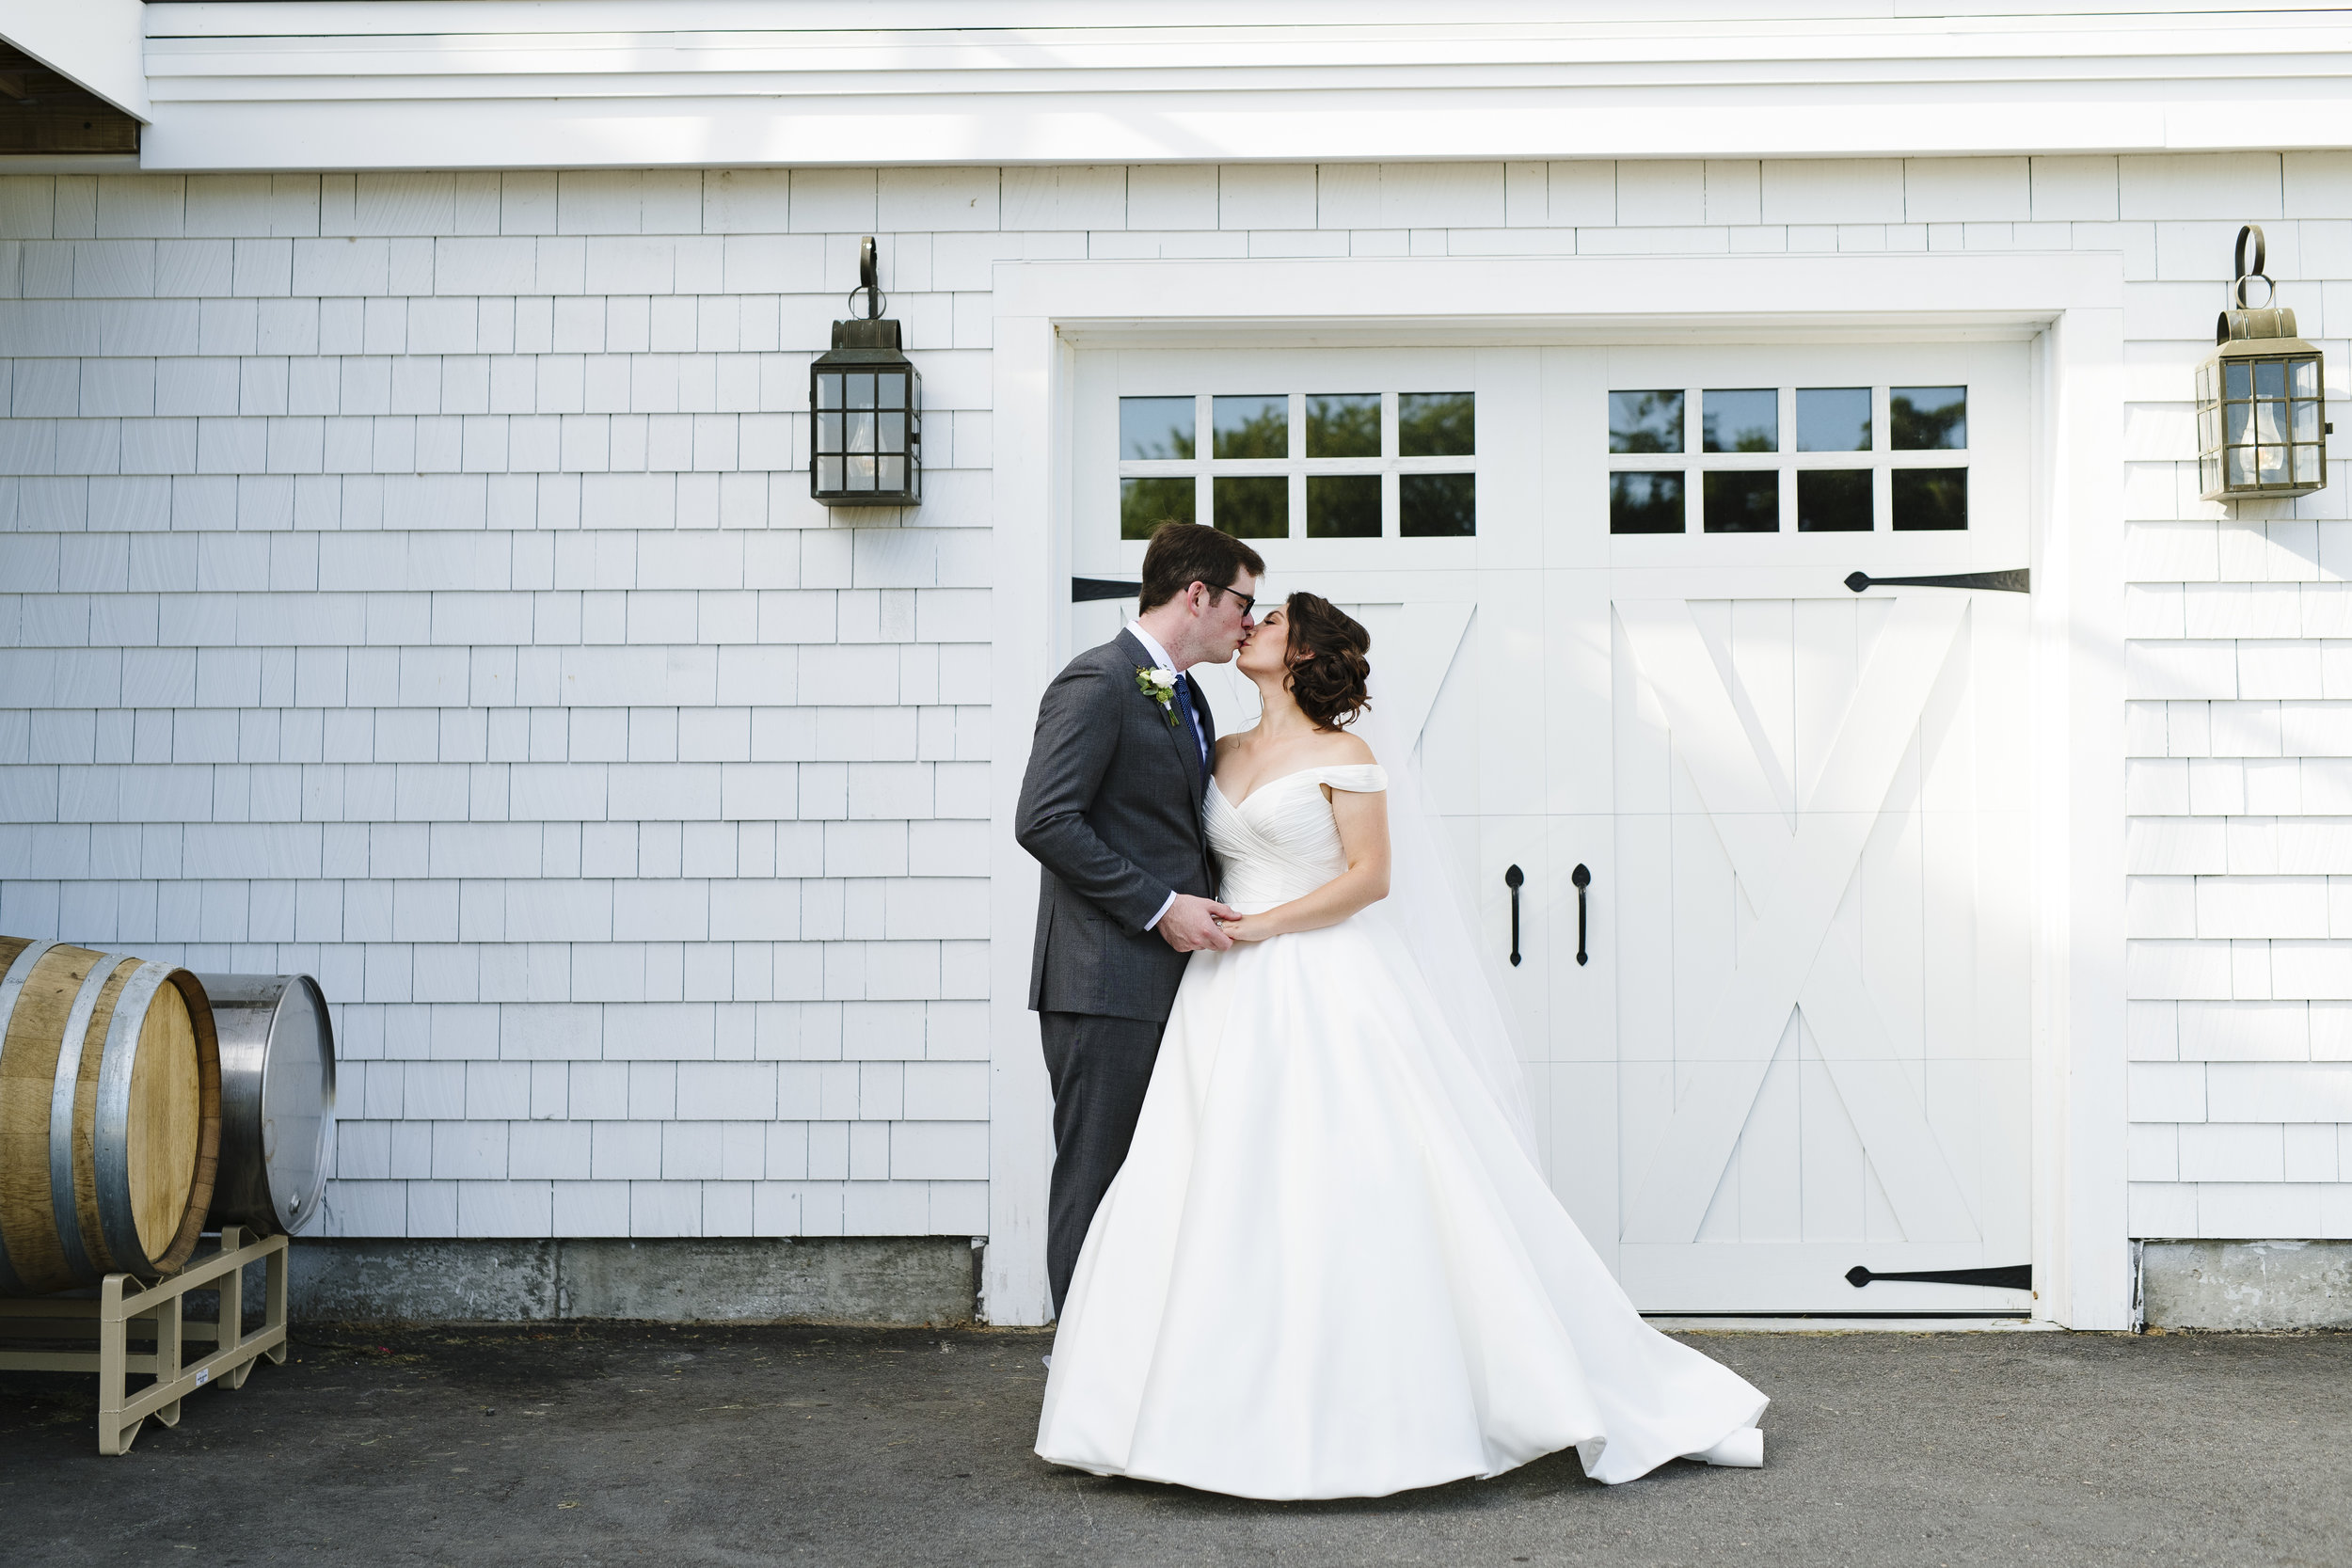 Bride and groom first look in the vineyard at Jonathan Edwards Winery in Connecticut - Pearl Weddings &amp; Events